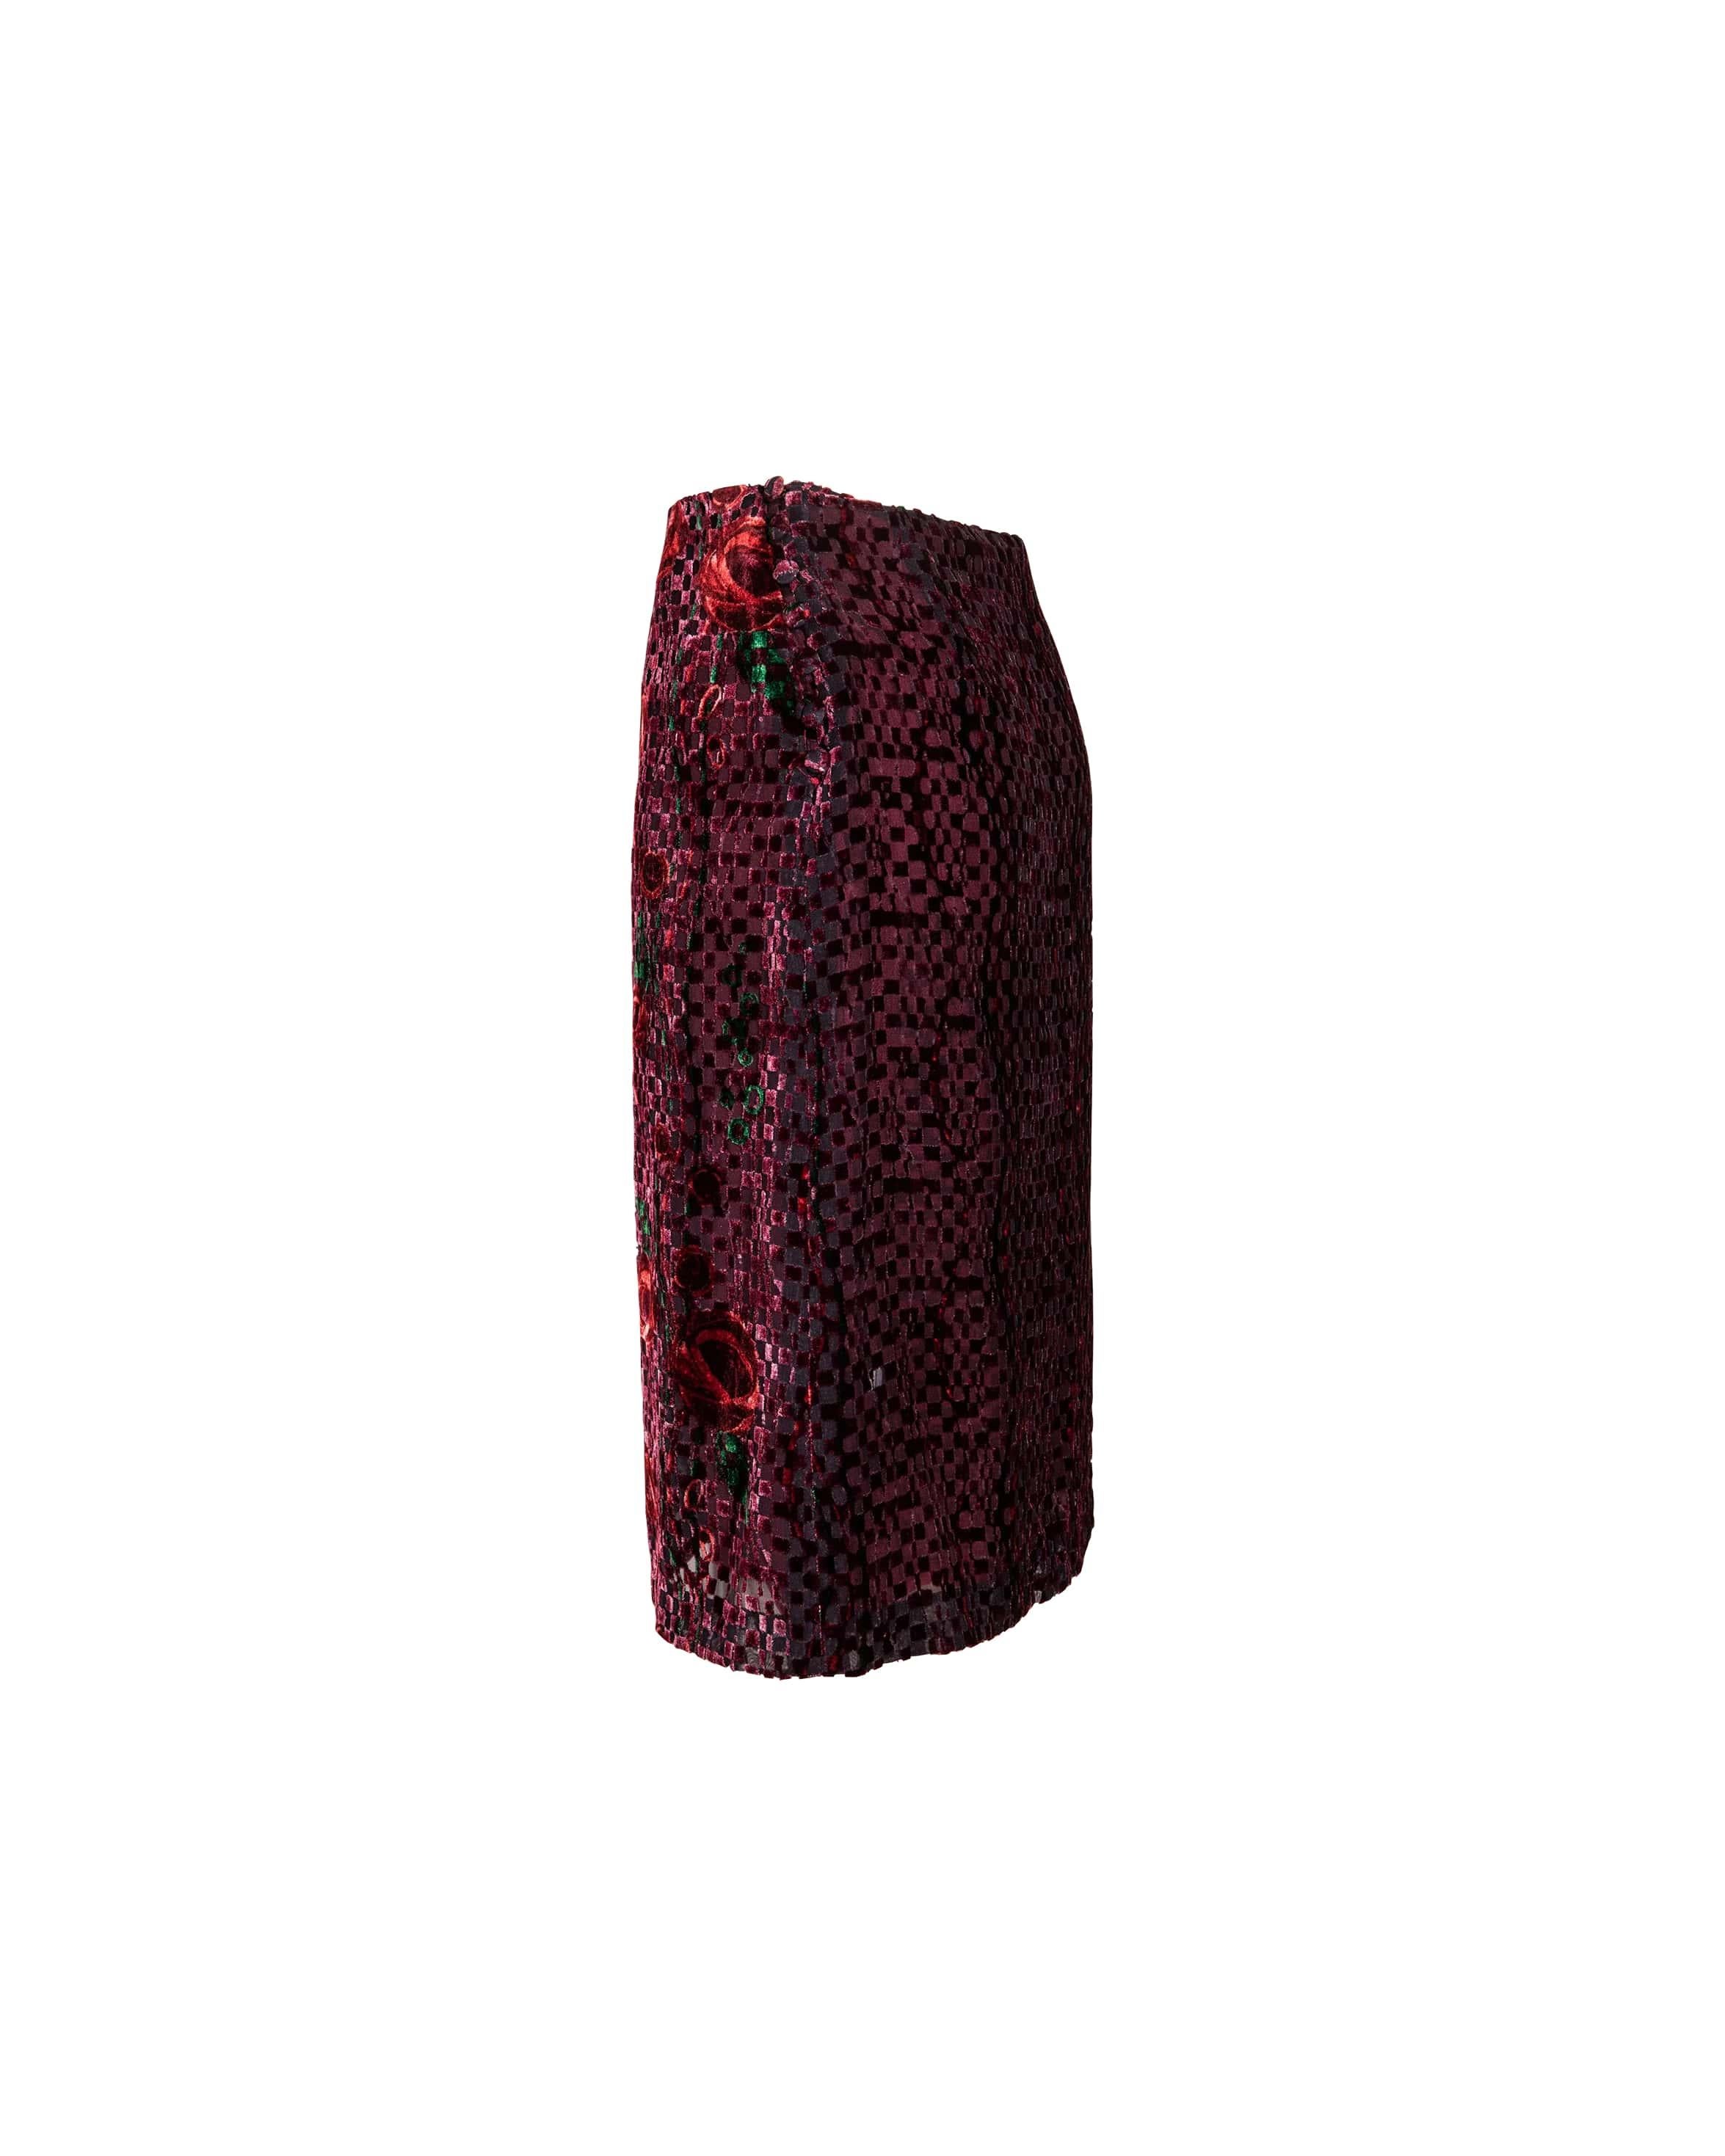 A/W 1998 Chloe by Stella McCartney rose and checkerboard print velvet burnout skirt. Mini skirt with silk lining. 1930's inspired fabric button closures on both sides. Overall geometric checker pattern with deconstructed, pixelated feeling